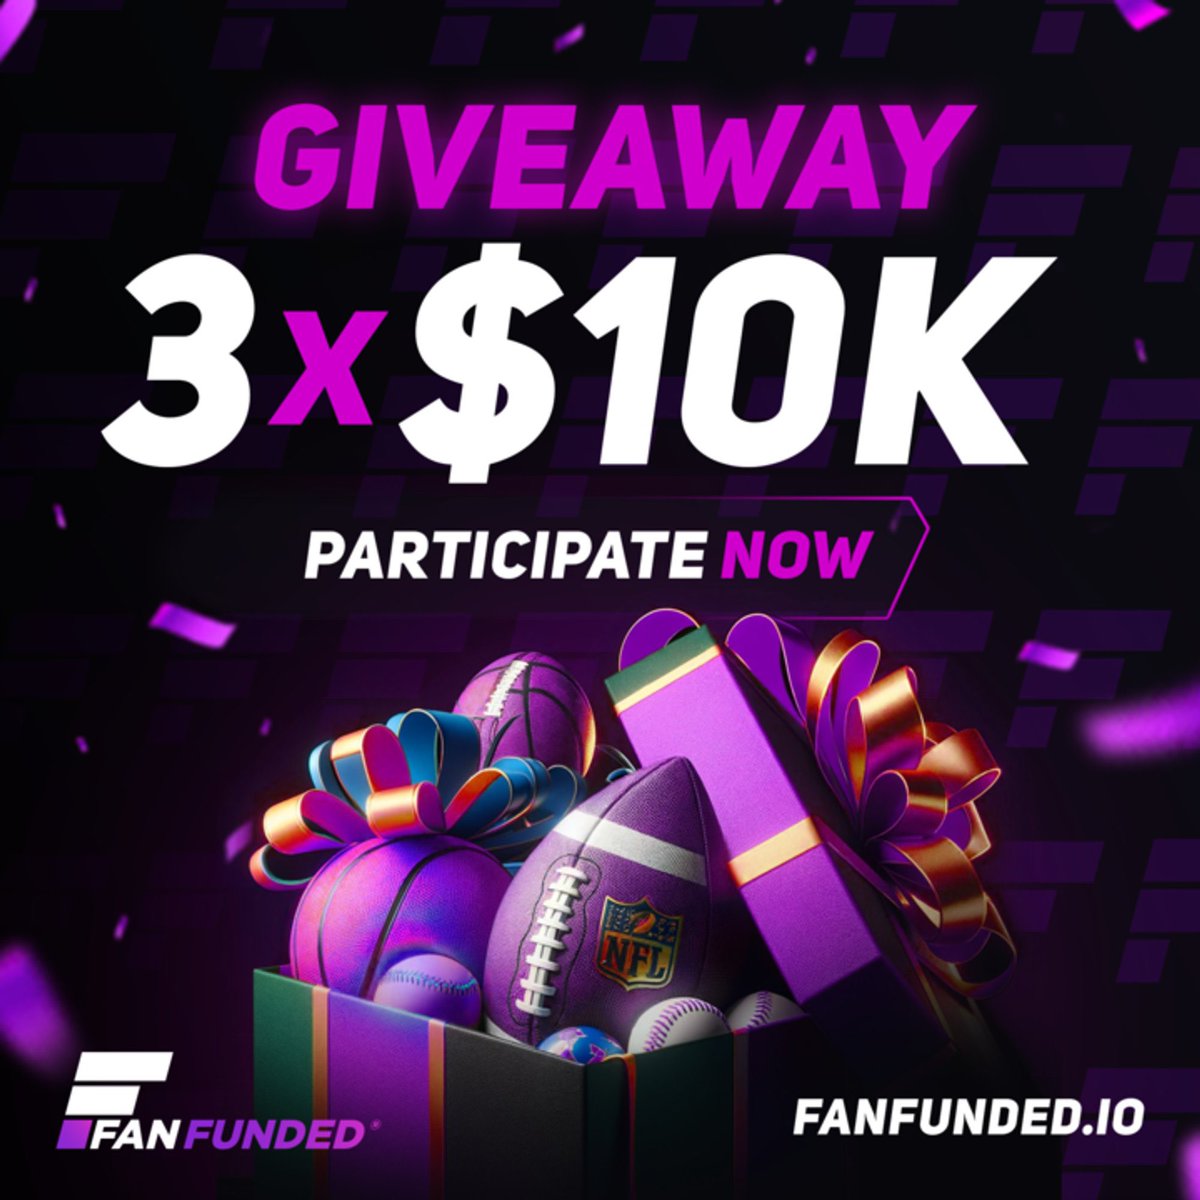 💥I’m extremely excited to announce a huge giveaway with @fanfundedclub, where we’re giving away three $10,000 accounts! 💰 

🚨TO ENTER:
1. Follow @fanfundedclub and me
2. Like and repost
3. Tag 3 pickers

For a quick summary, fanfunded is a site that credits you with their…